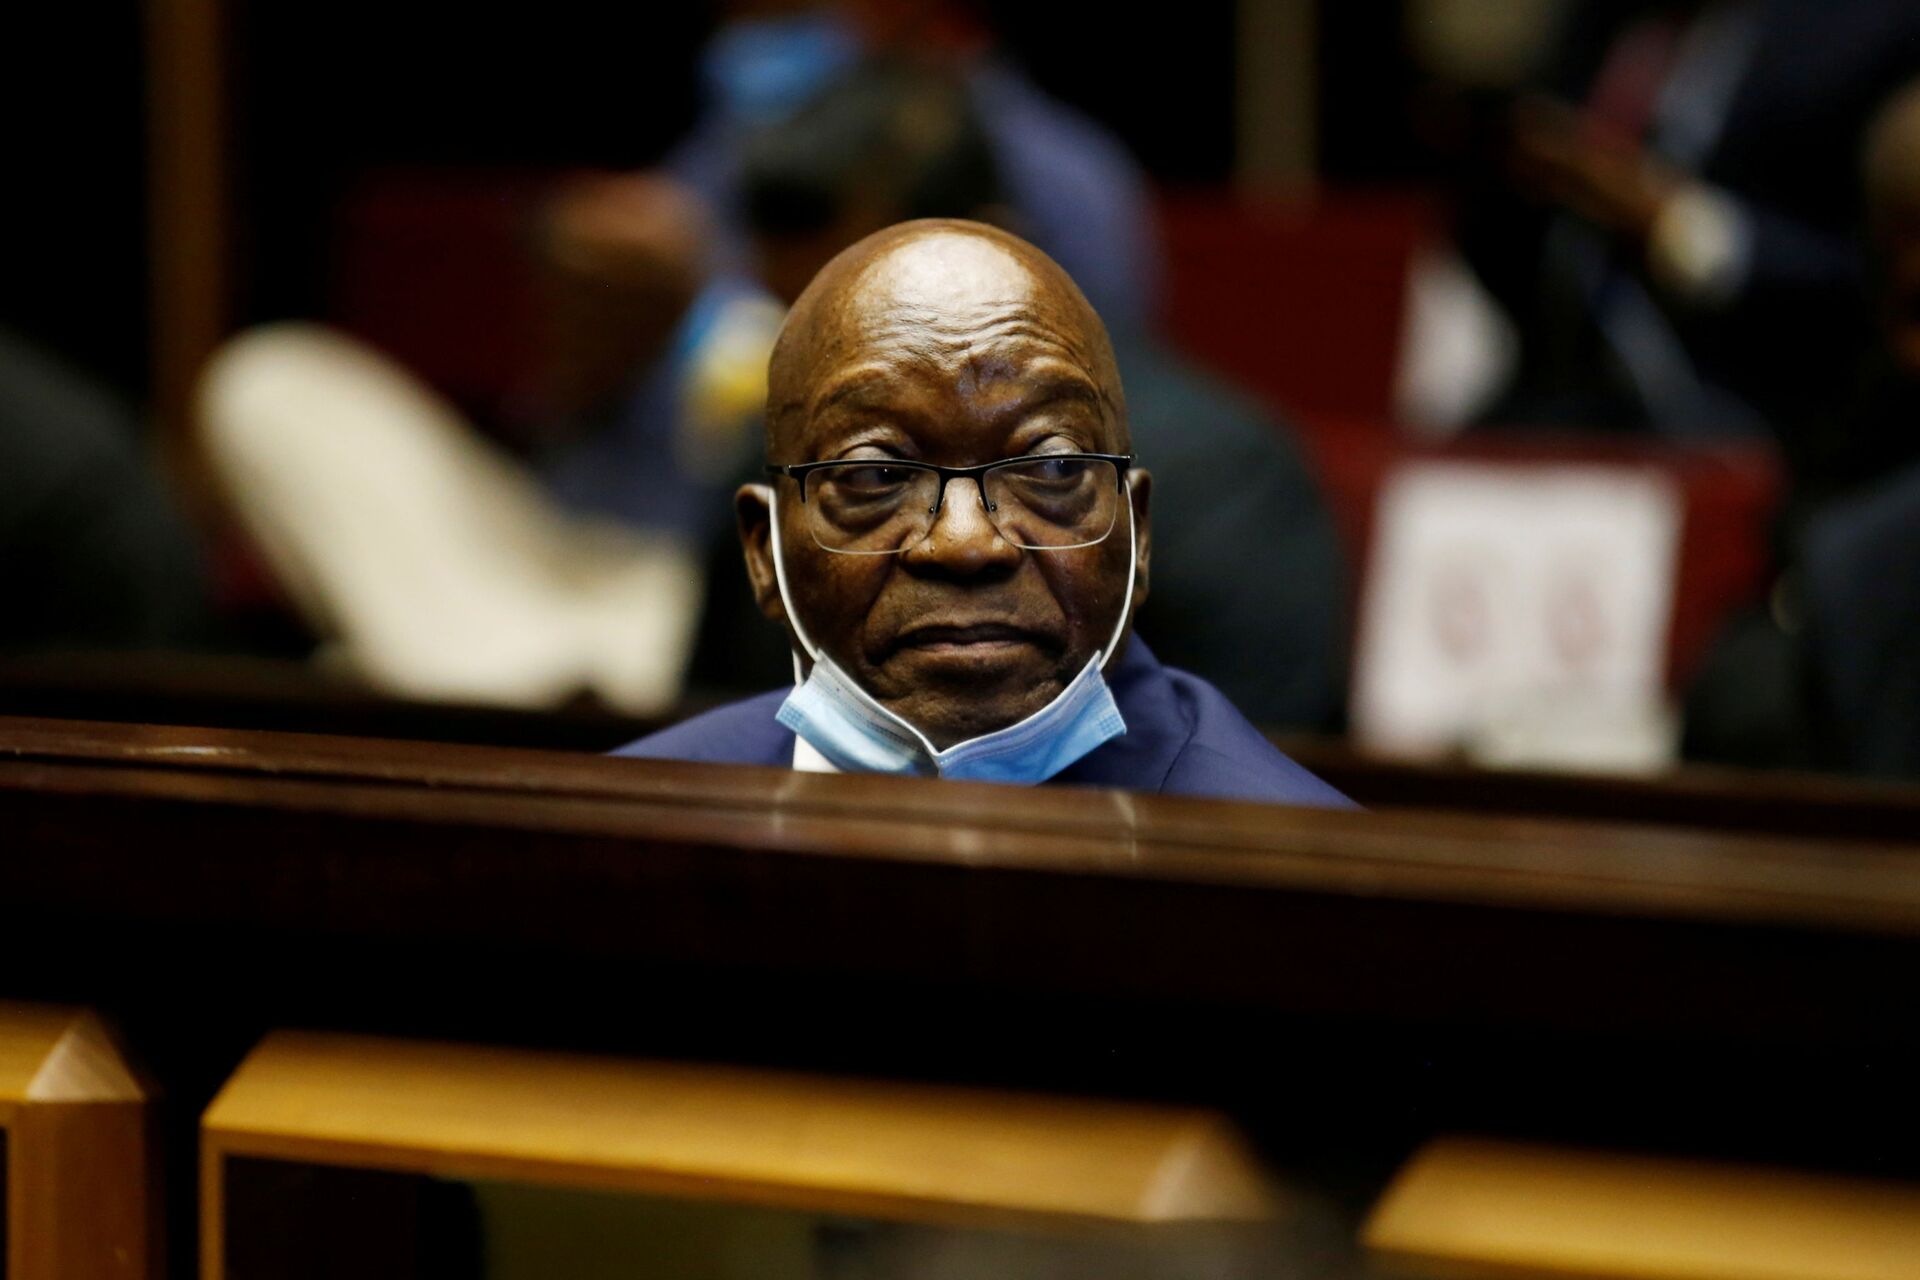 Former South African President Jacob Zuma sits in the dock after recess in his corruption trial in Pietermaritzburg, South Africa, May 26, 2021 - Sputnik International, 1920, 07.09.2021